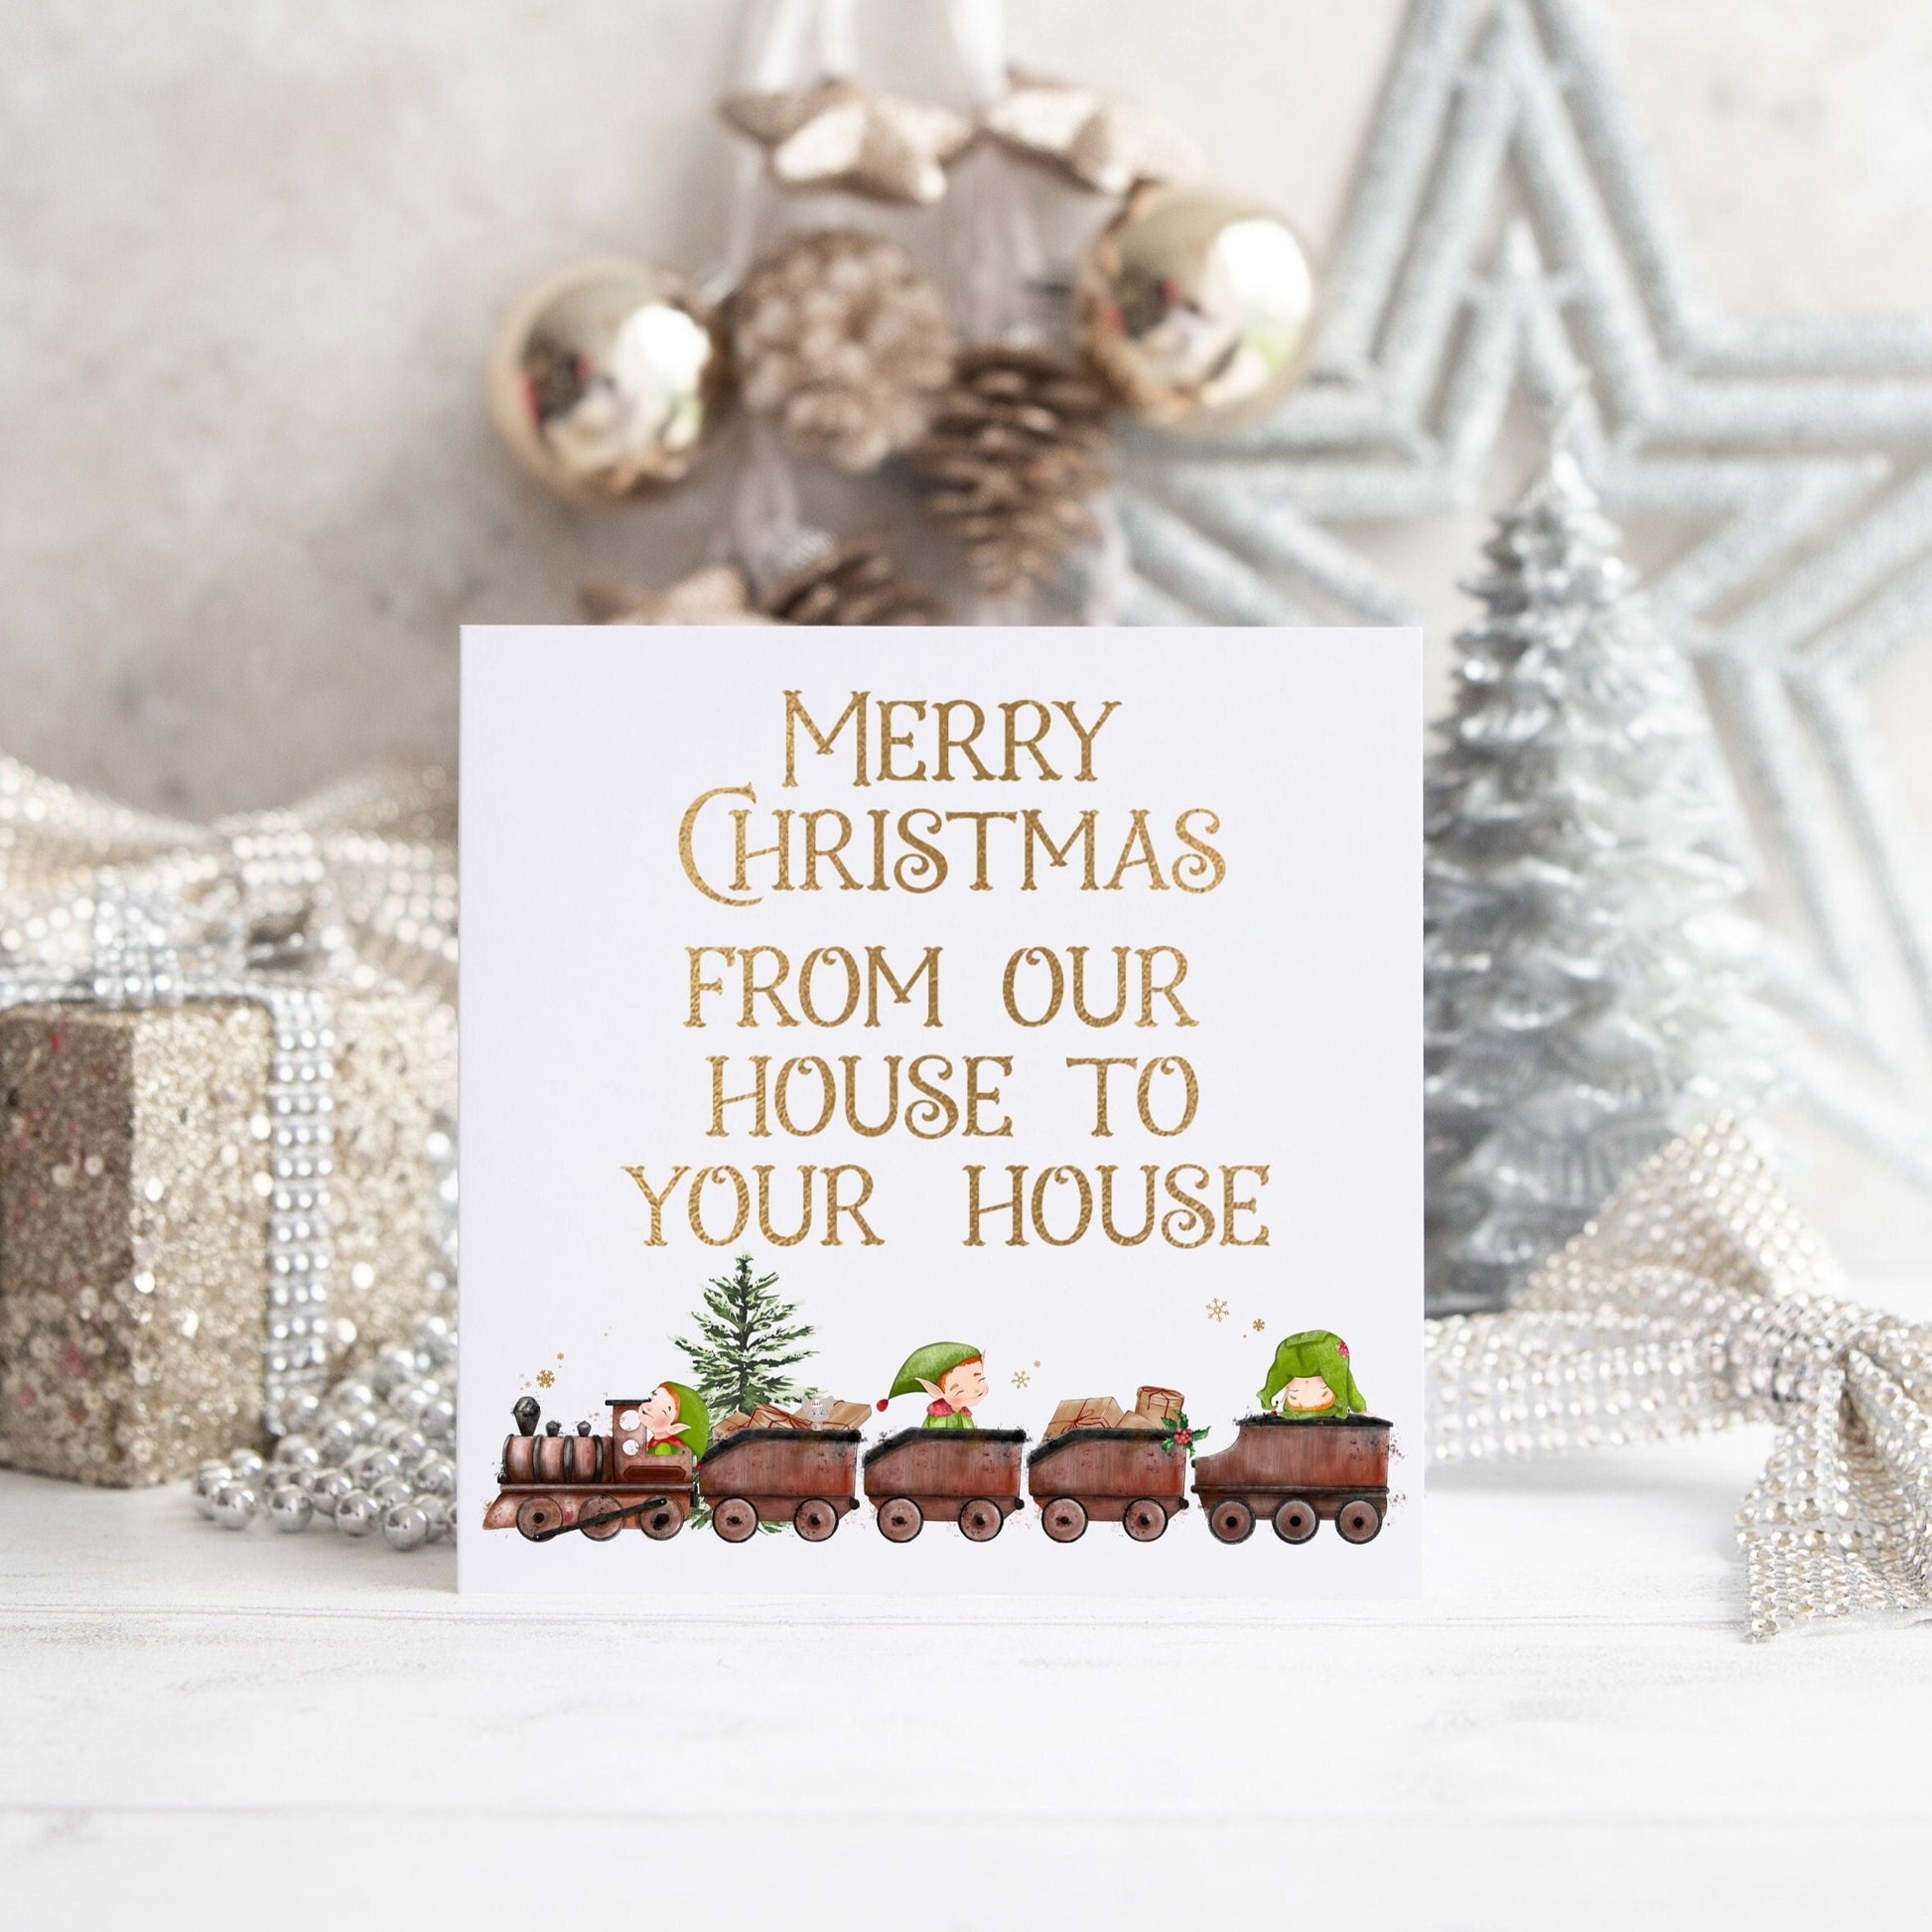 Christmas card with an elf train design and text reading 'Merry Christmas from our house to your house'